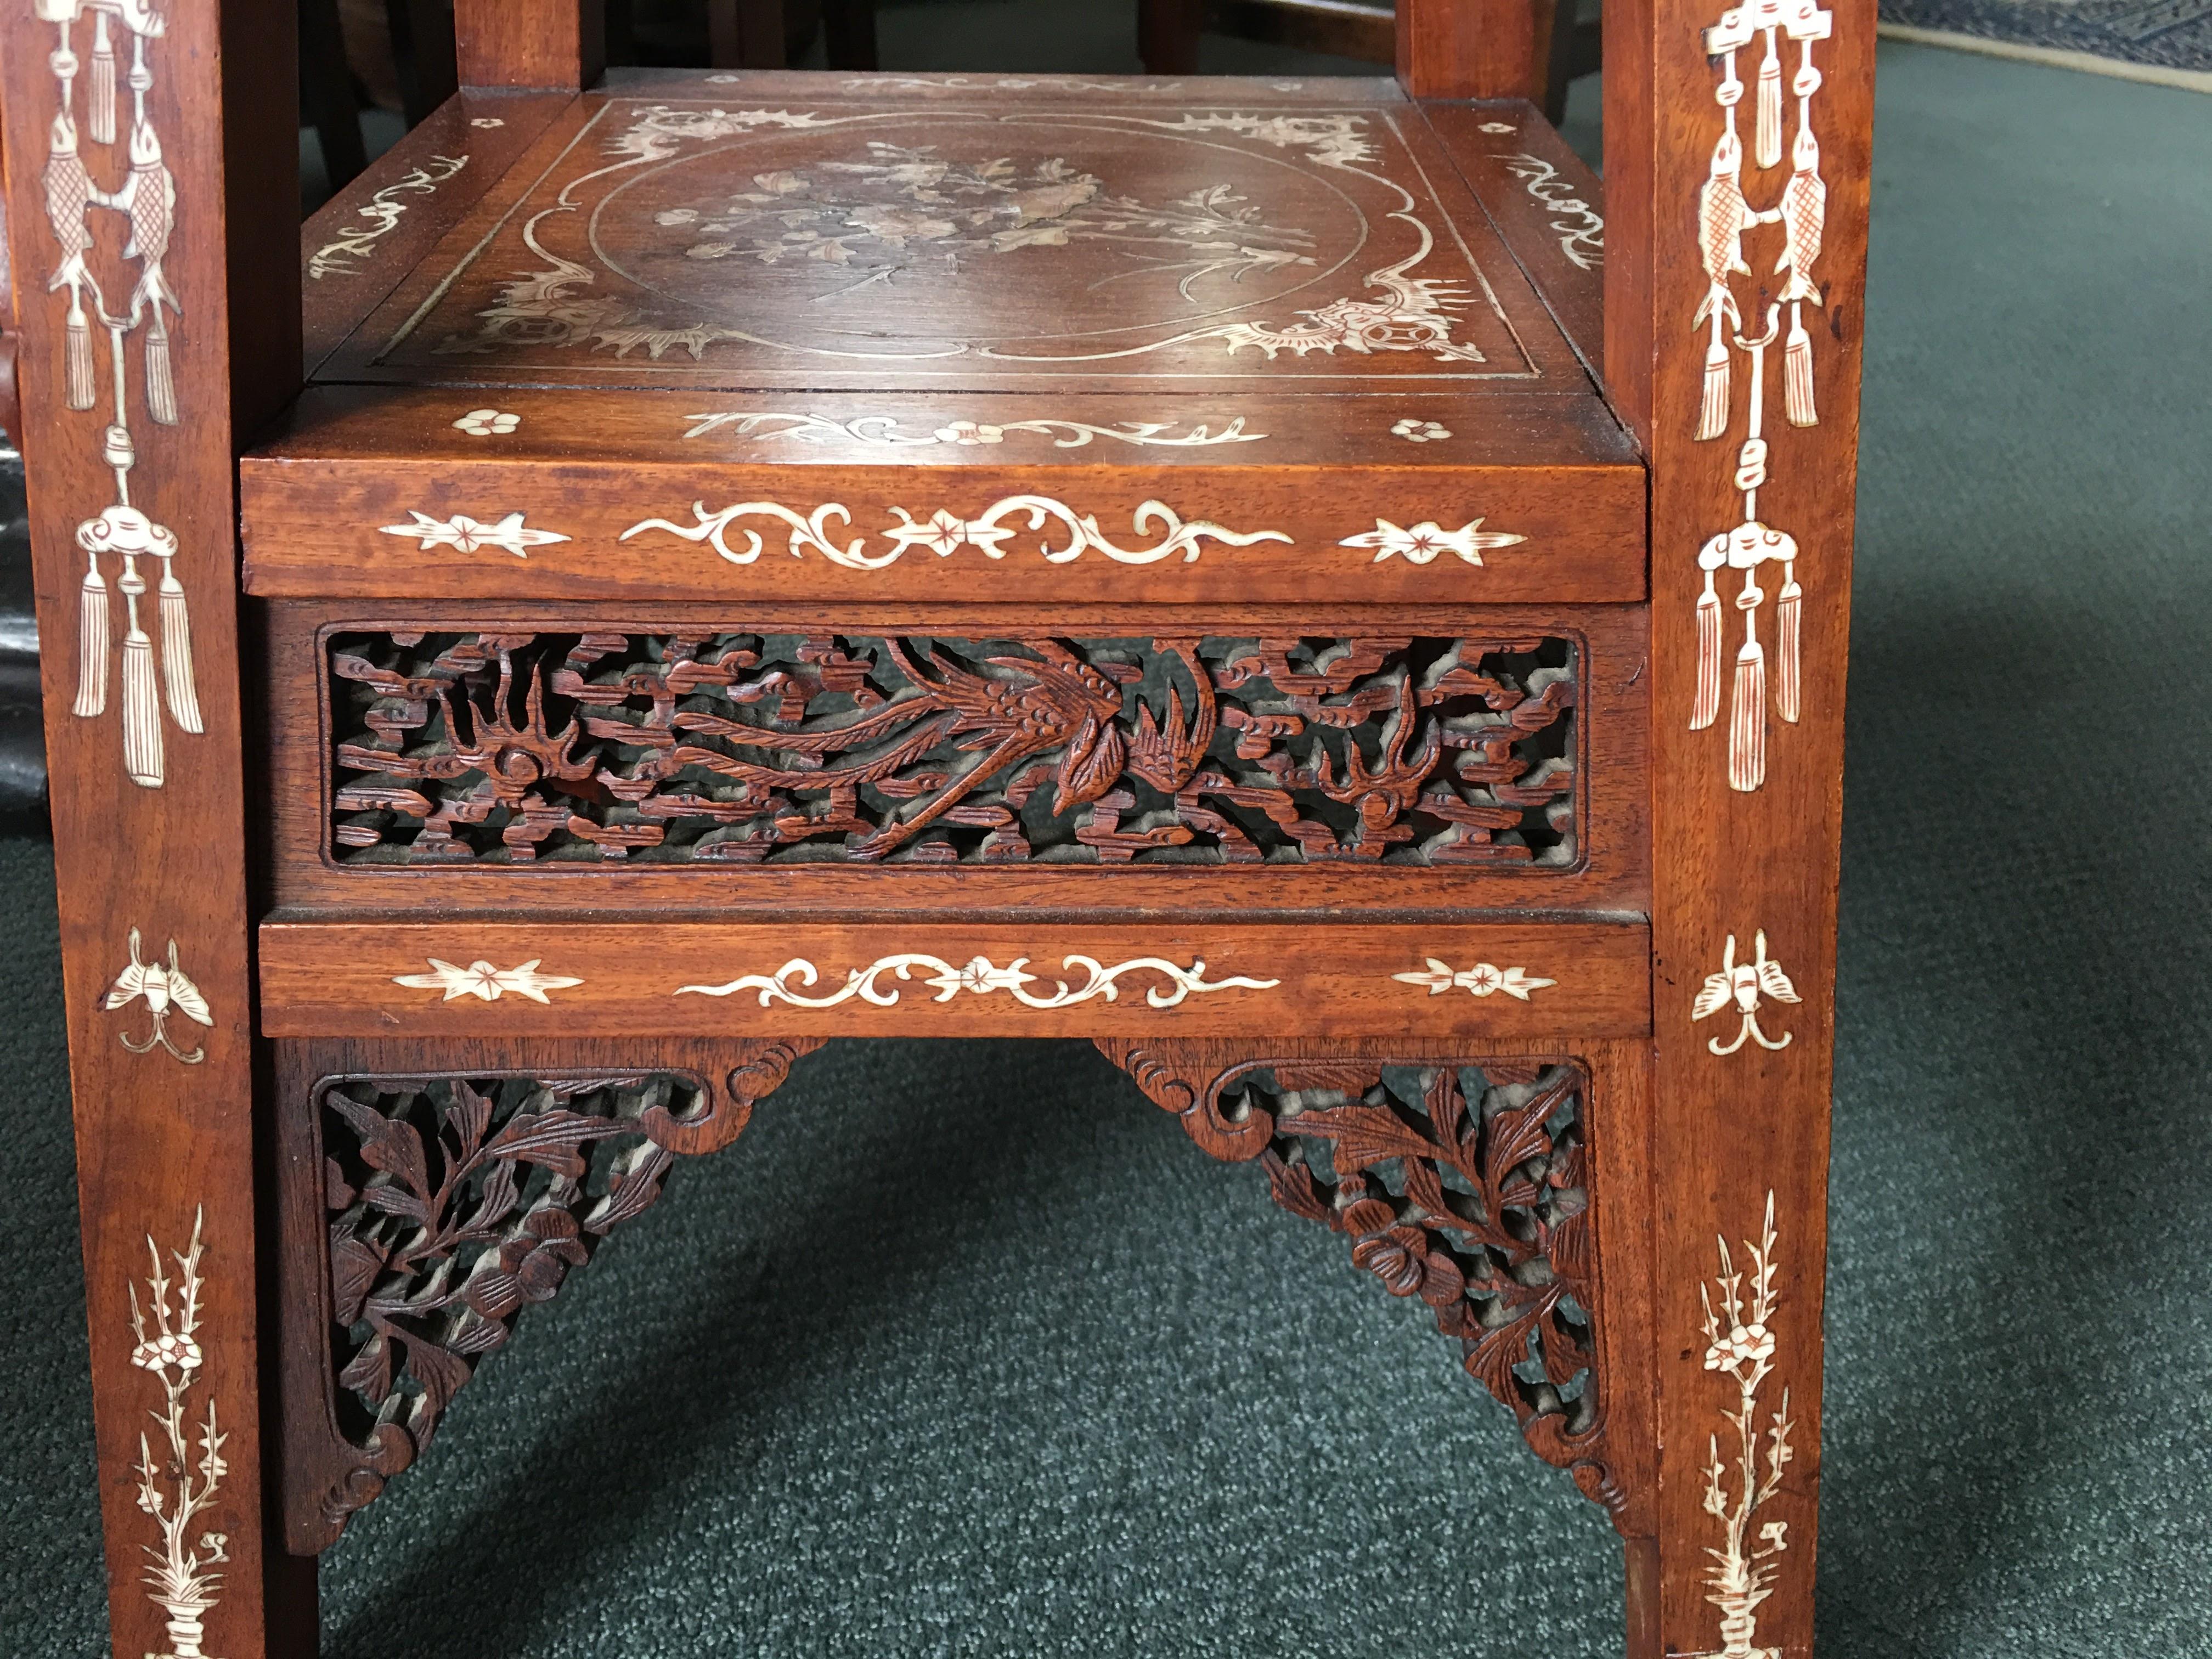 Chinese hardwood table of tapering square form, the legs and shelves with fine inlaid bone scenes including figures and pagodas, the skirt and brackets with finely carved openwork panels. Old paper label beneath with name and address, date 1931,